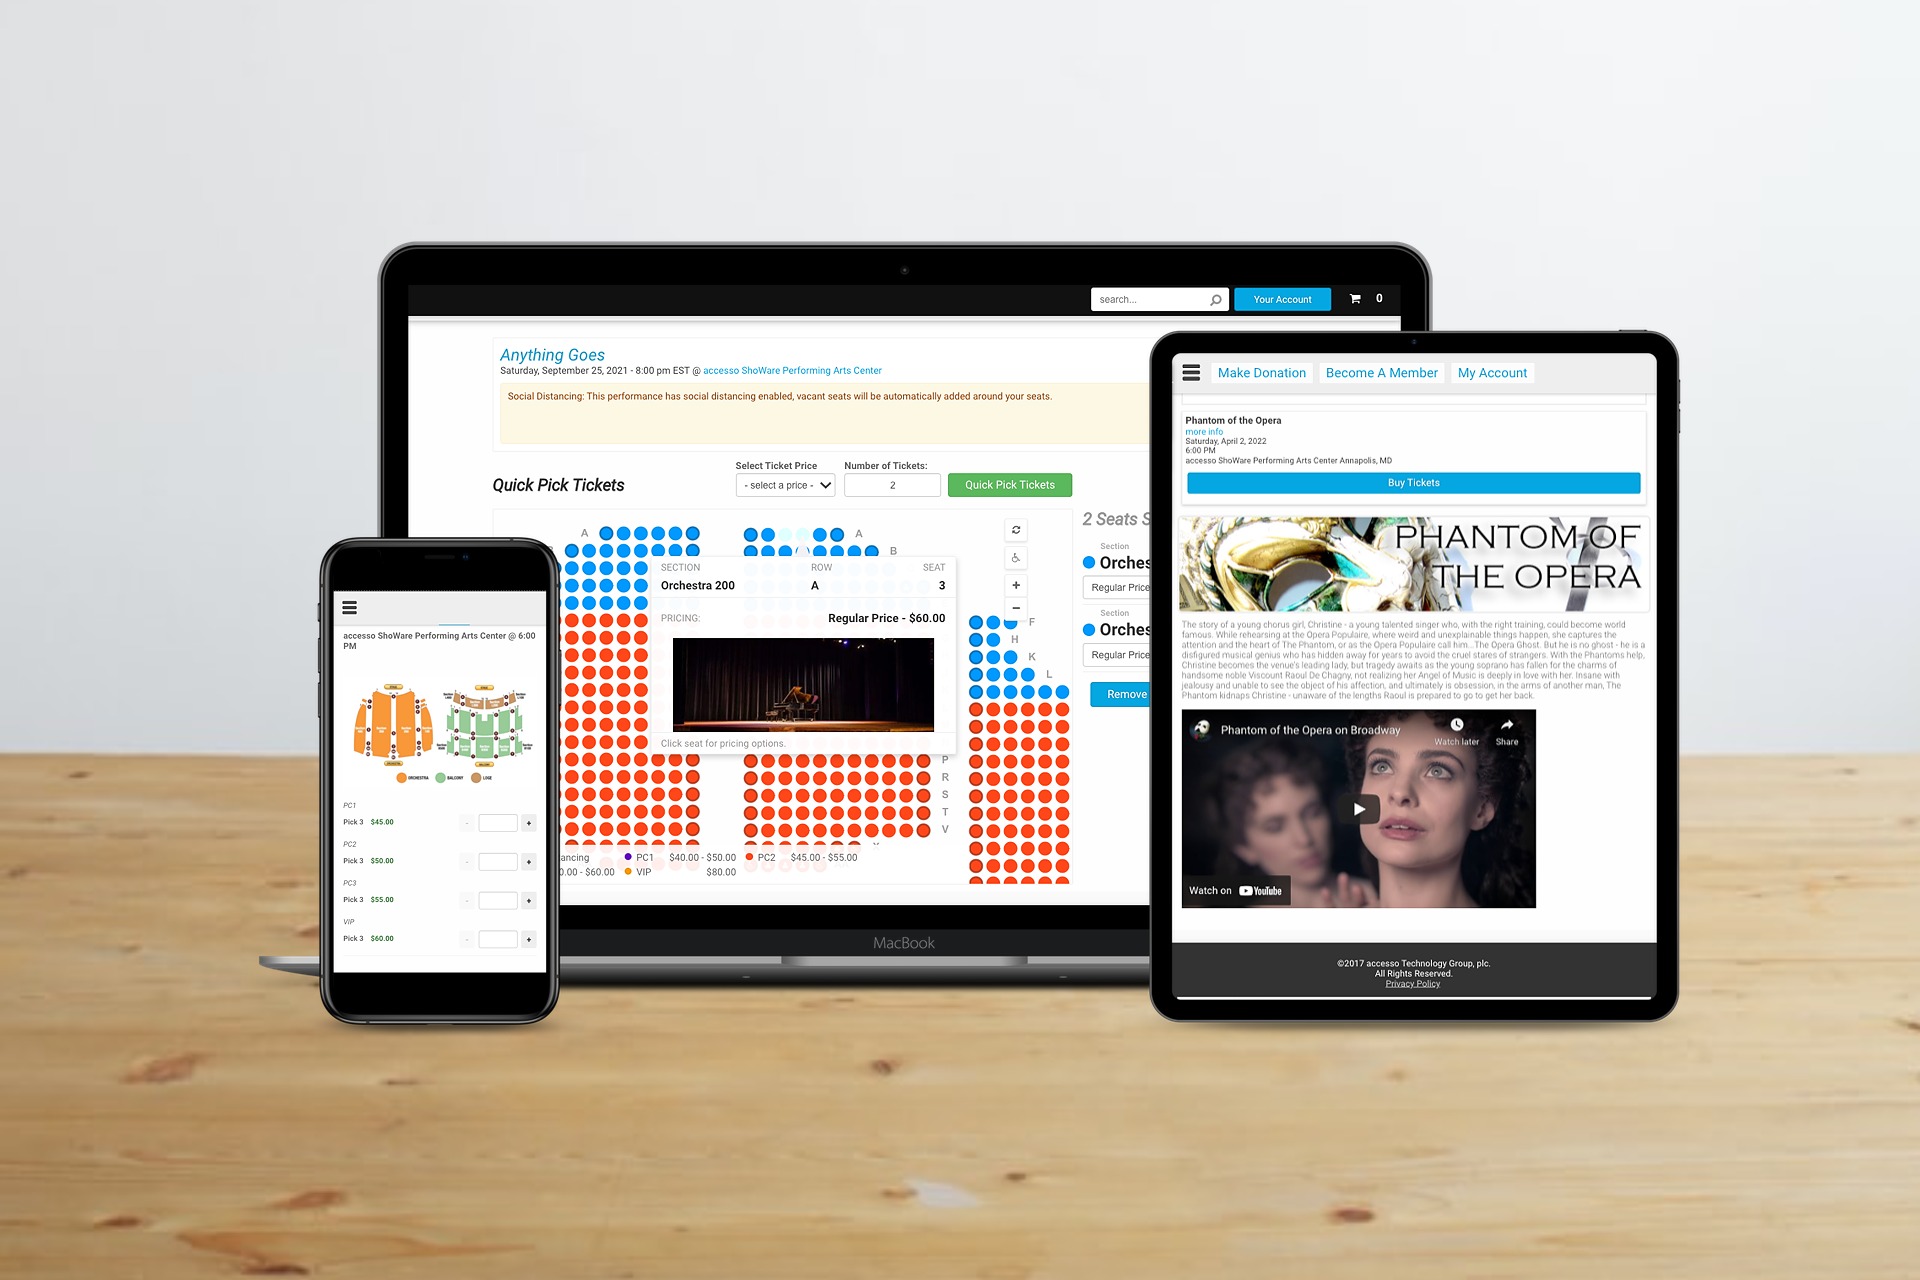 Our intuitive and engaging platform allows users to easily select seats, view show details and purchase tickets on any device.